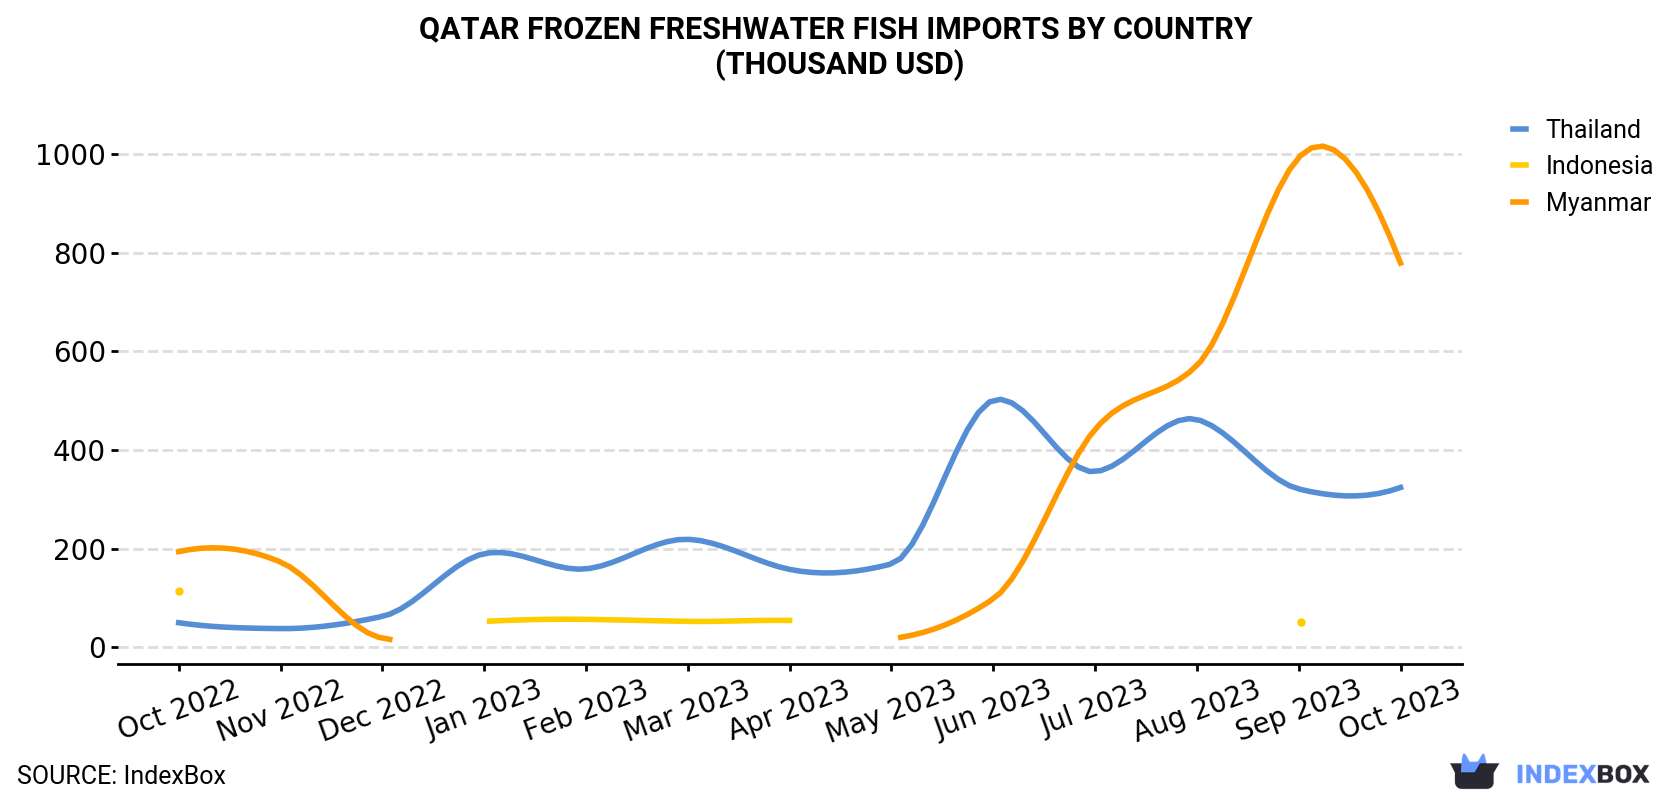 Qatar Frozen Freshwater Fish Imports By Country (Thousand USD)